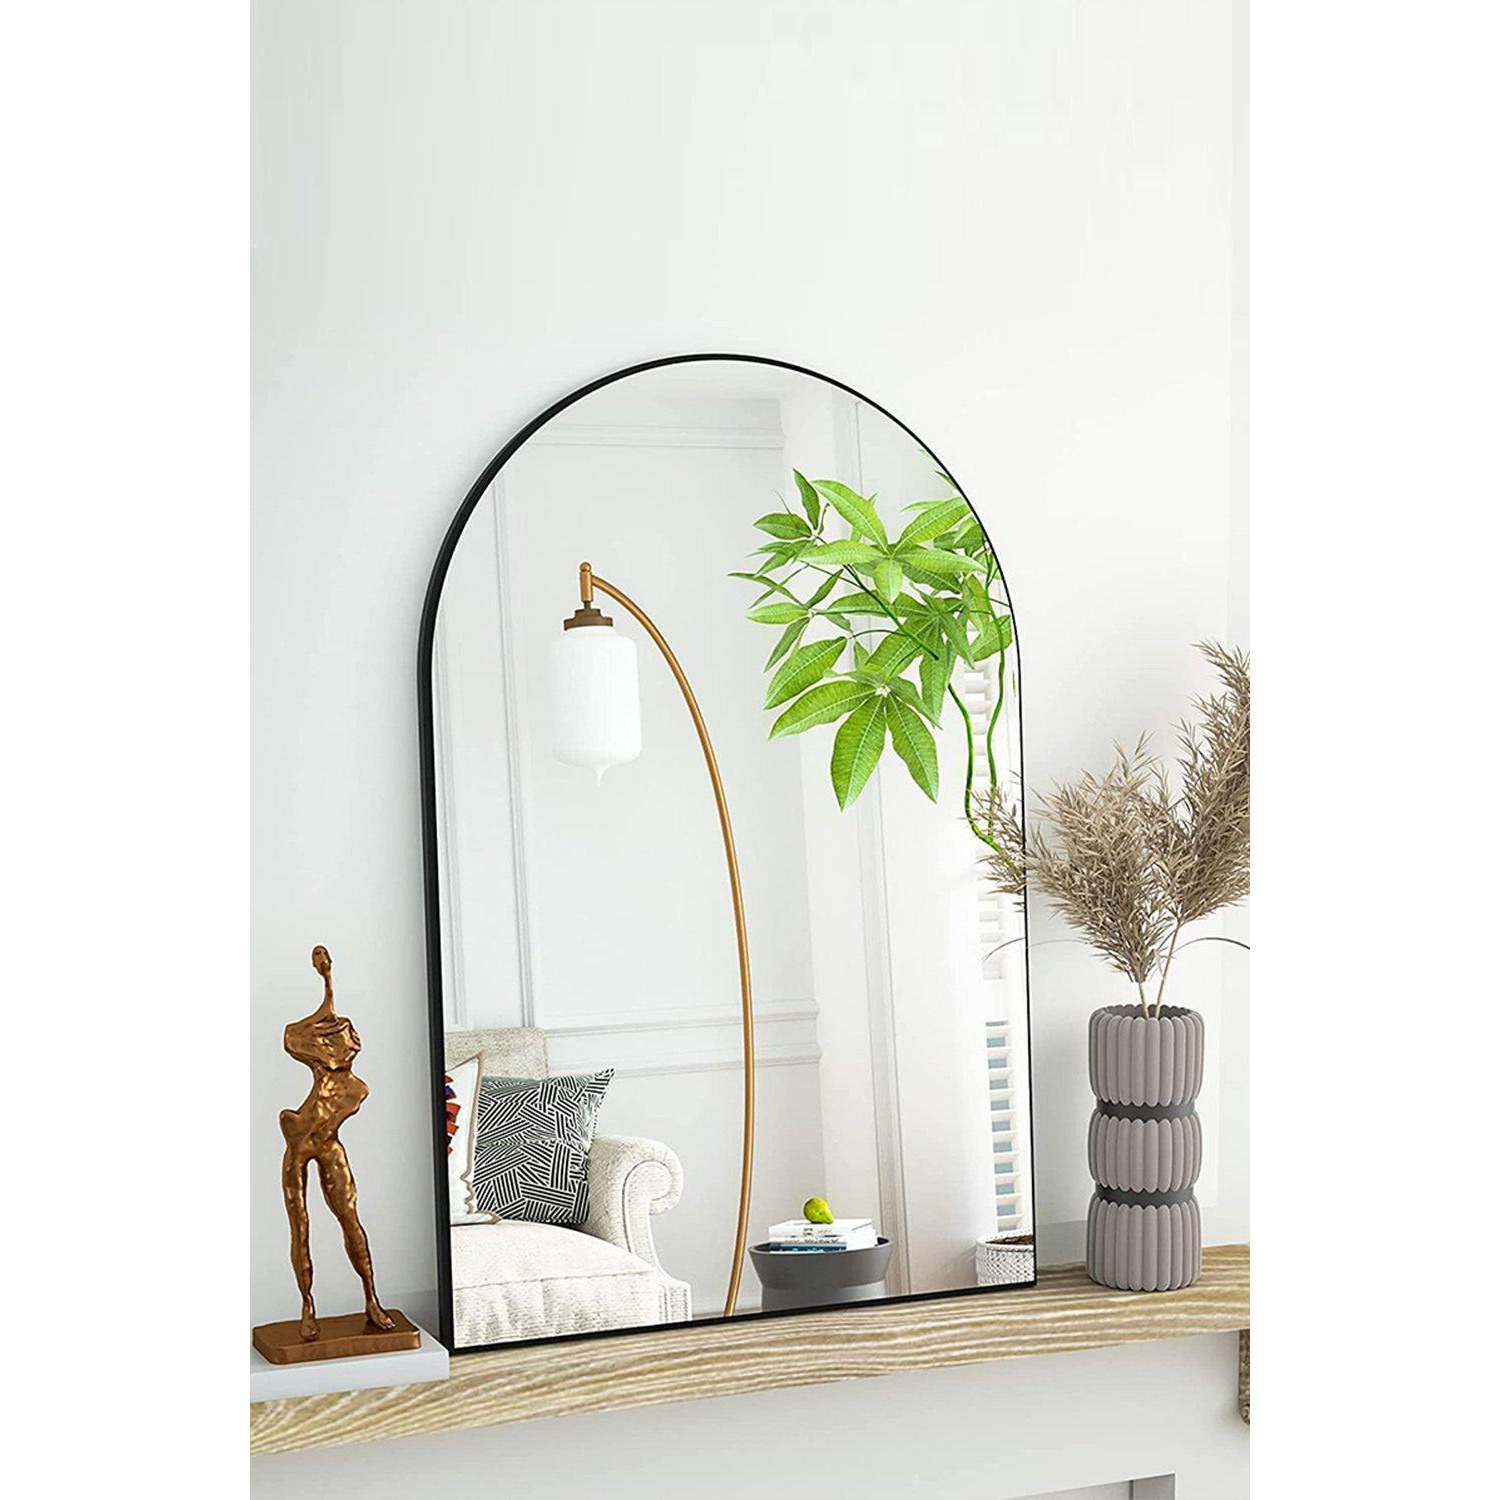 40cm W x 50cm H Contemporary Arched Wall Mirror - image 1